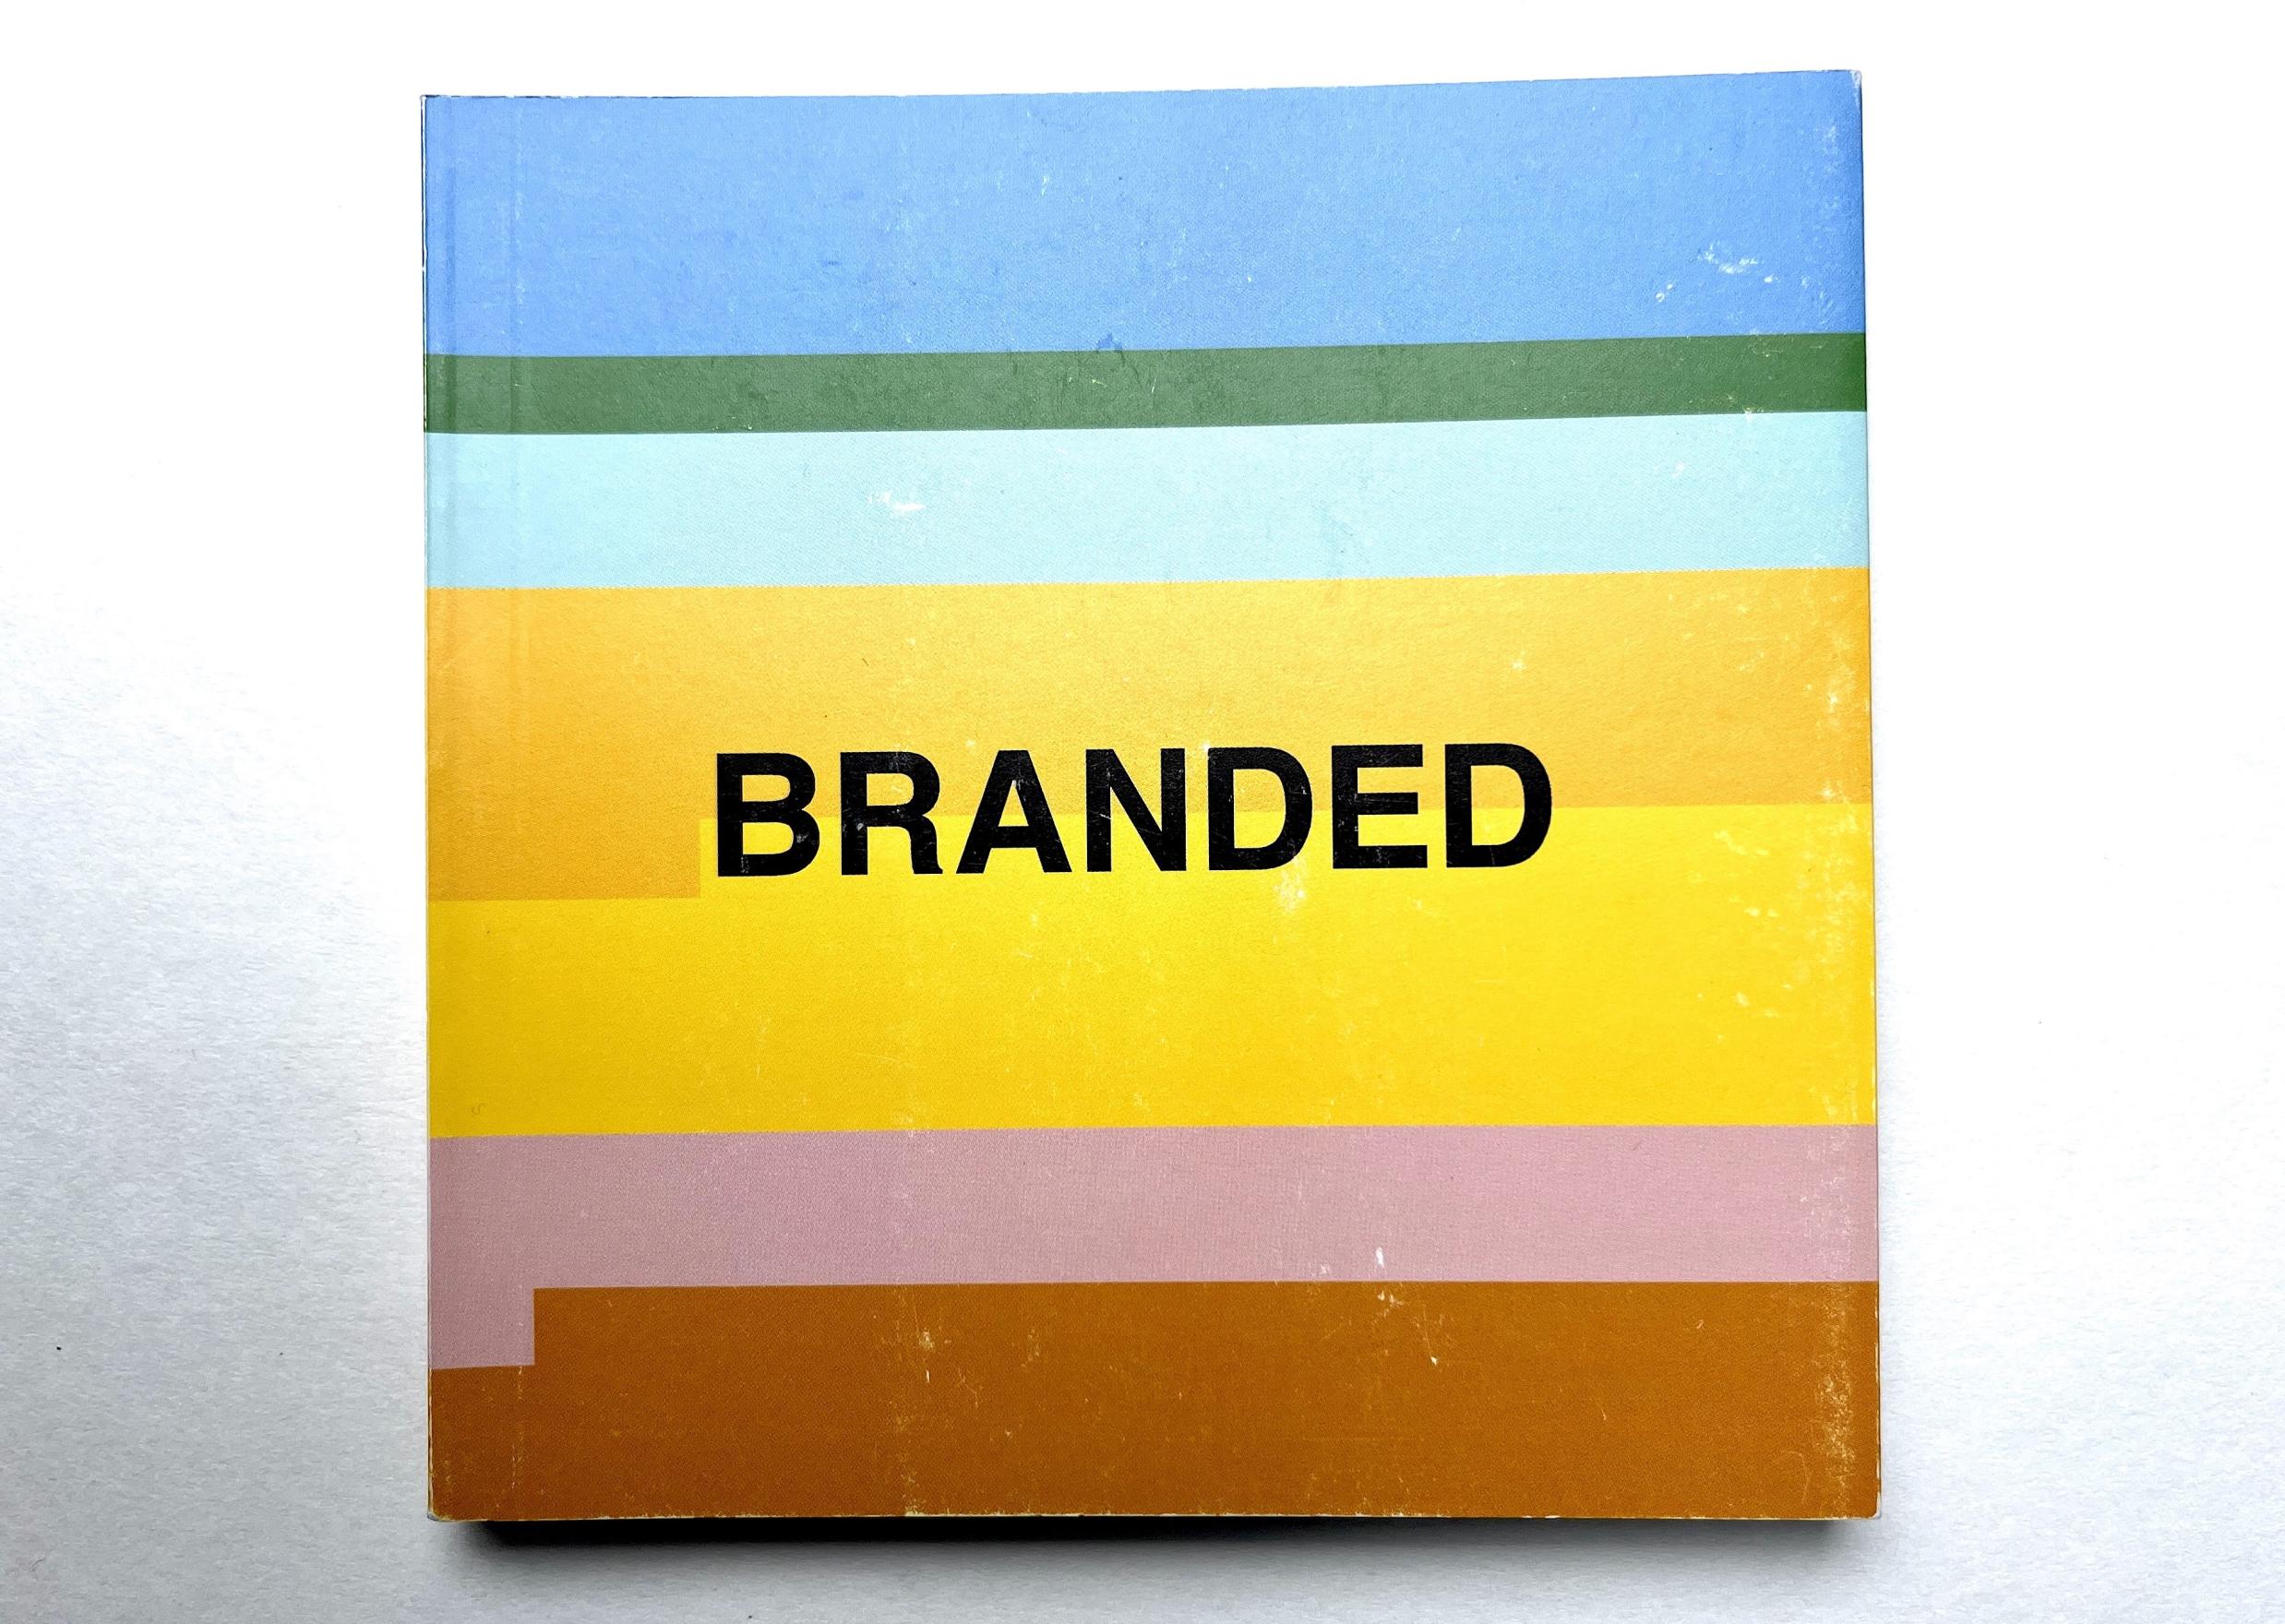 A small square book with multicoloured horizontal stripes in blues, greens and yellows rests on a white background. The word Branded is written in all caps in a black sans serif font in the center of the front cover.